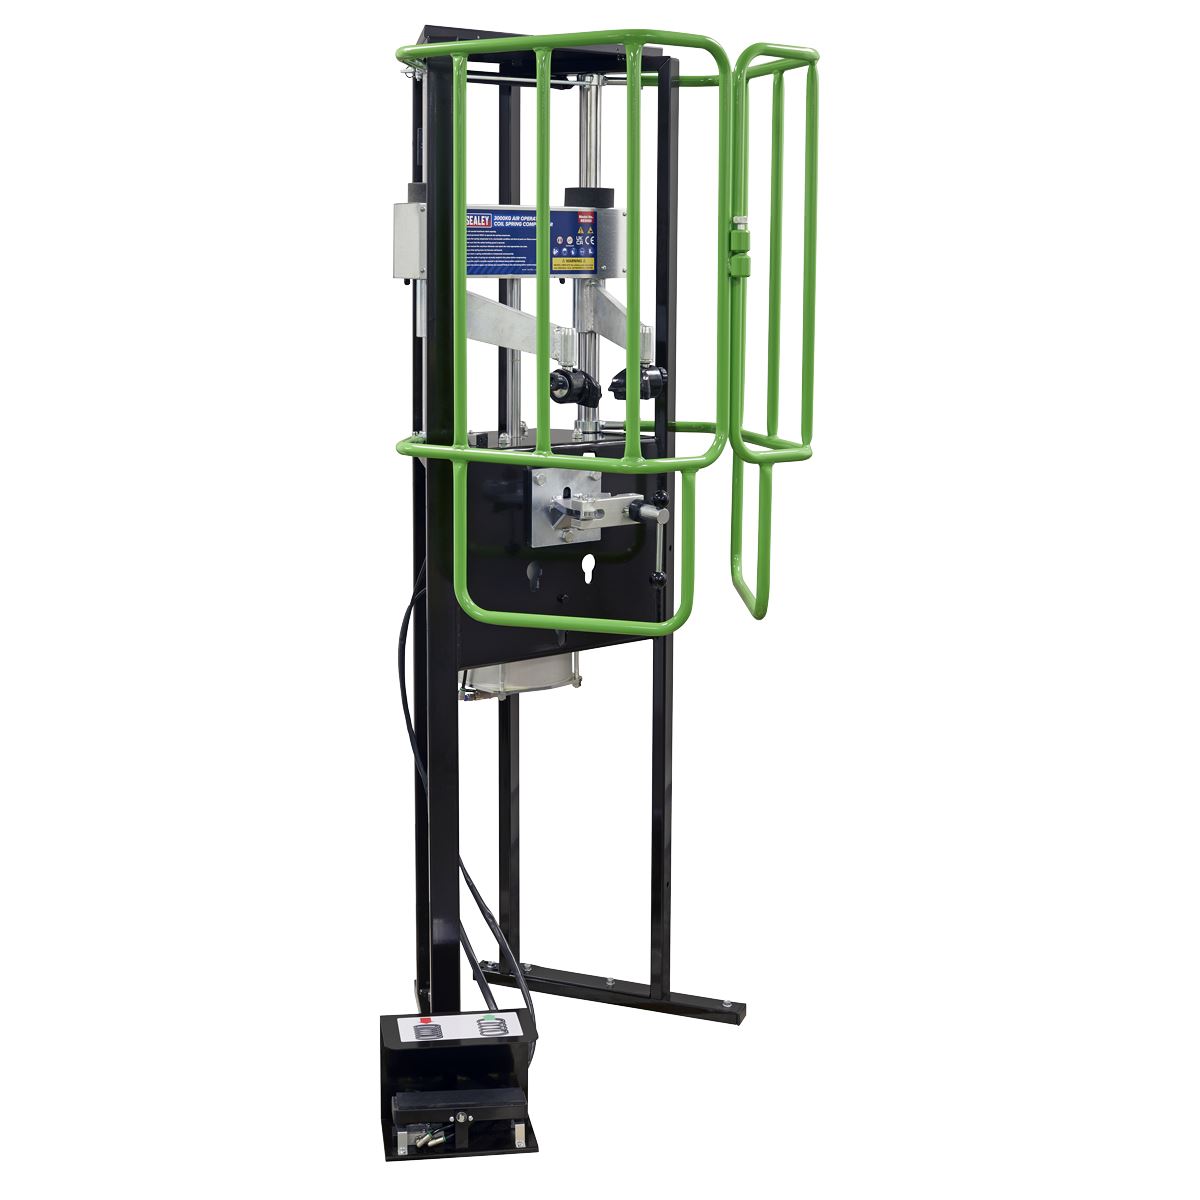 Sealey Air Operated Coil Spring Compressor 3000kg